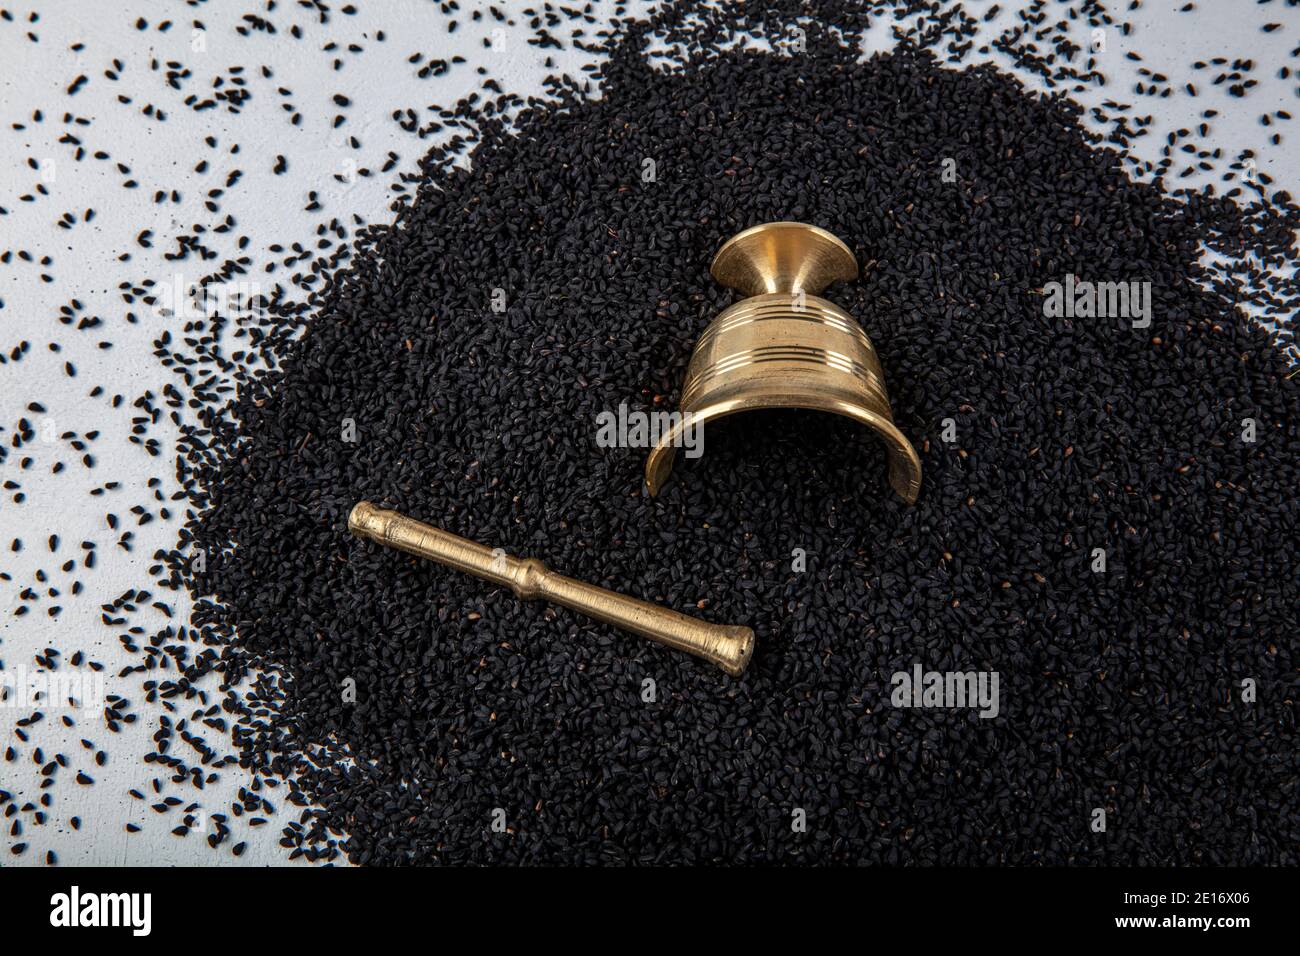 Nigella sativa seeds also known as black cumin, kalo jeera, kalonji and black caraway in iron scoop and mortar on white wooden background with copy sp Stock Photo